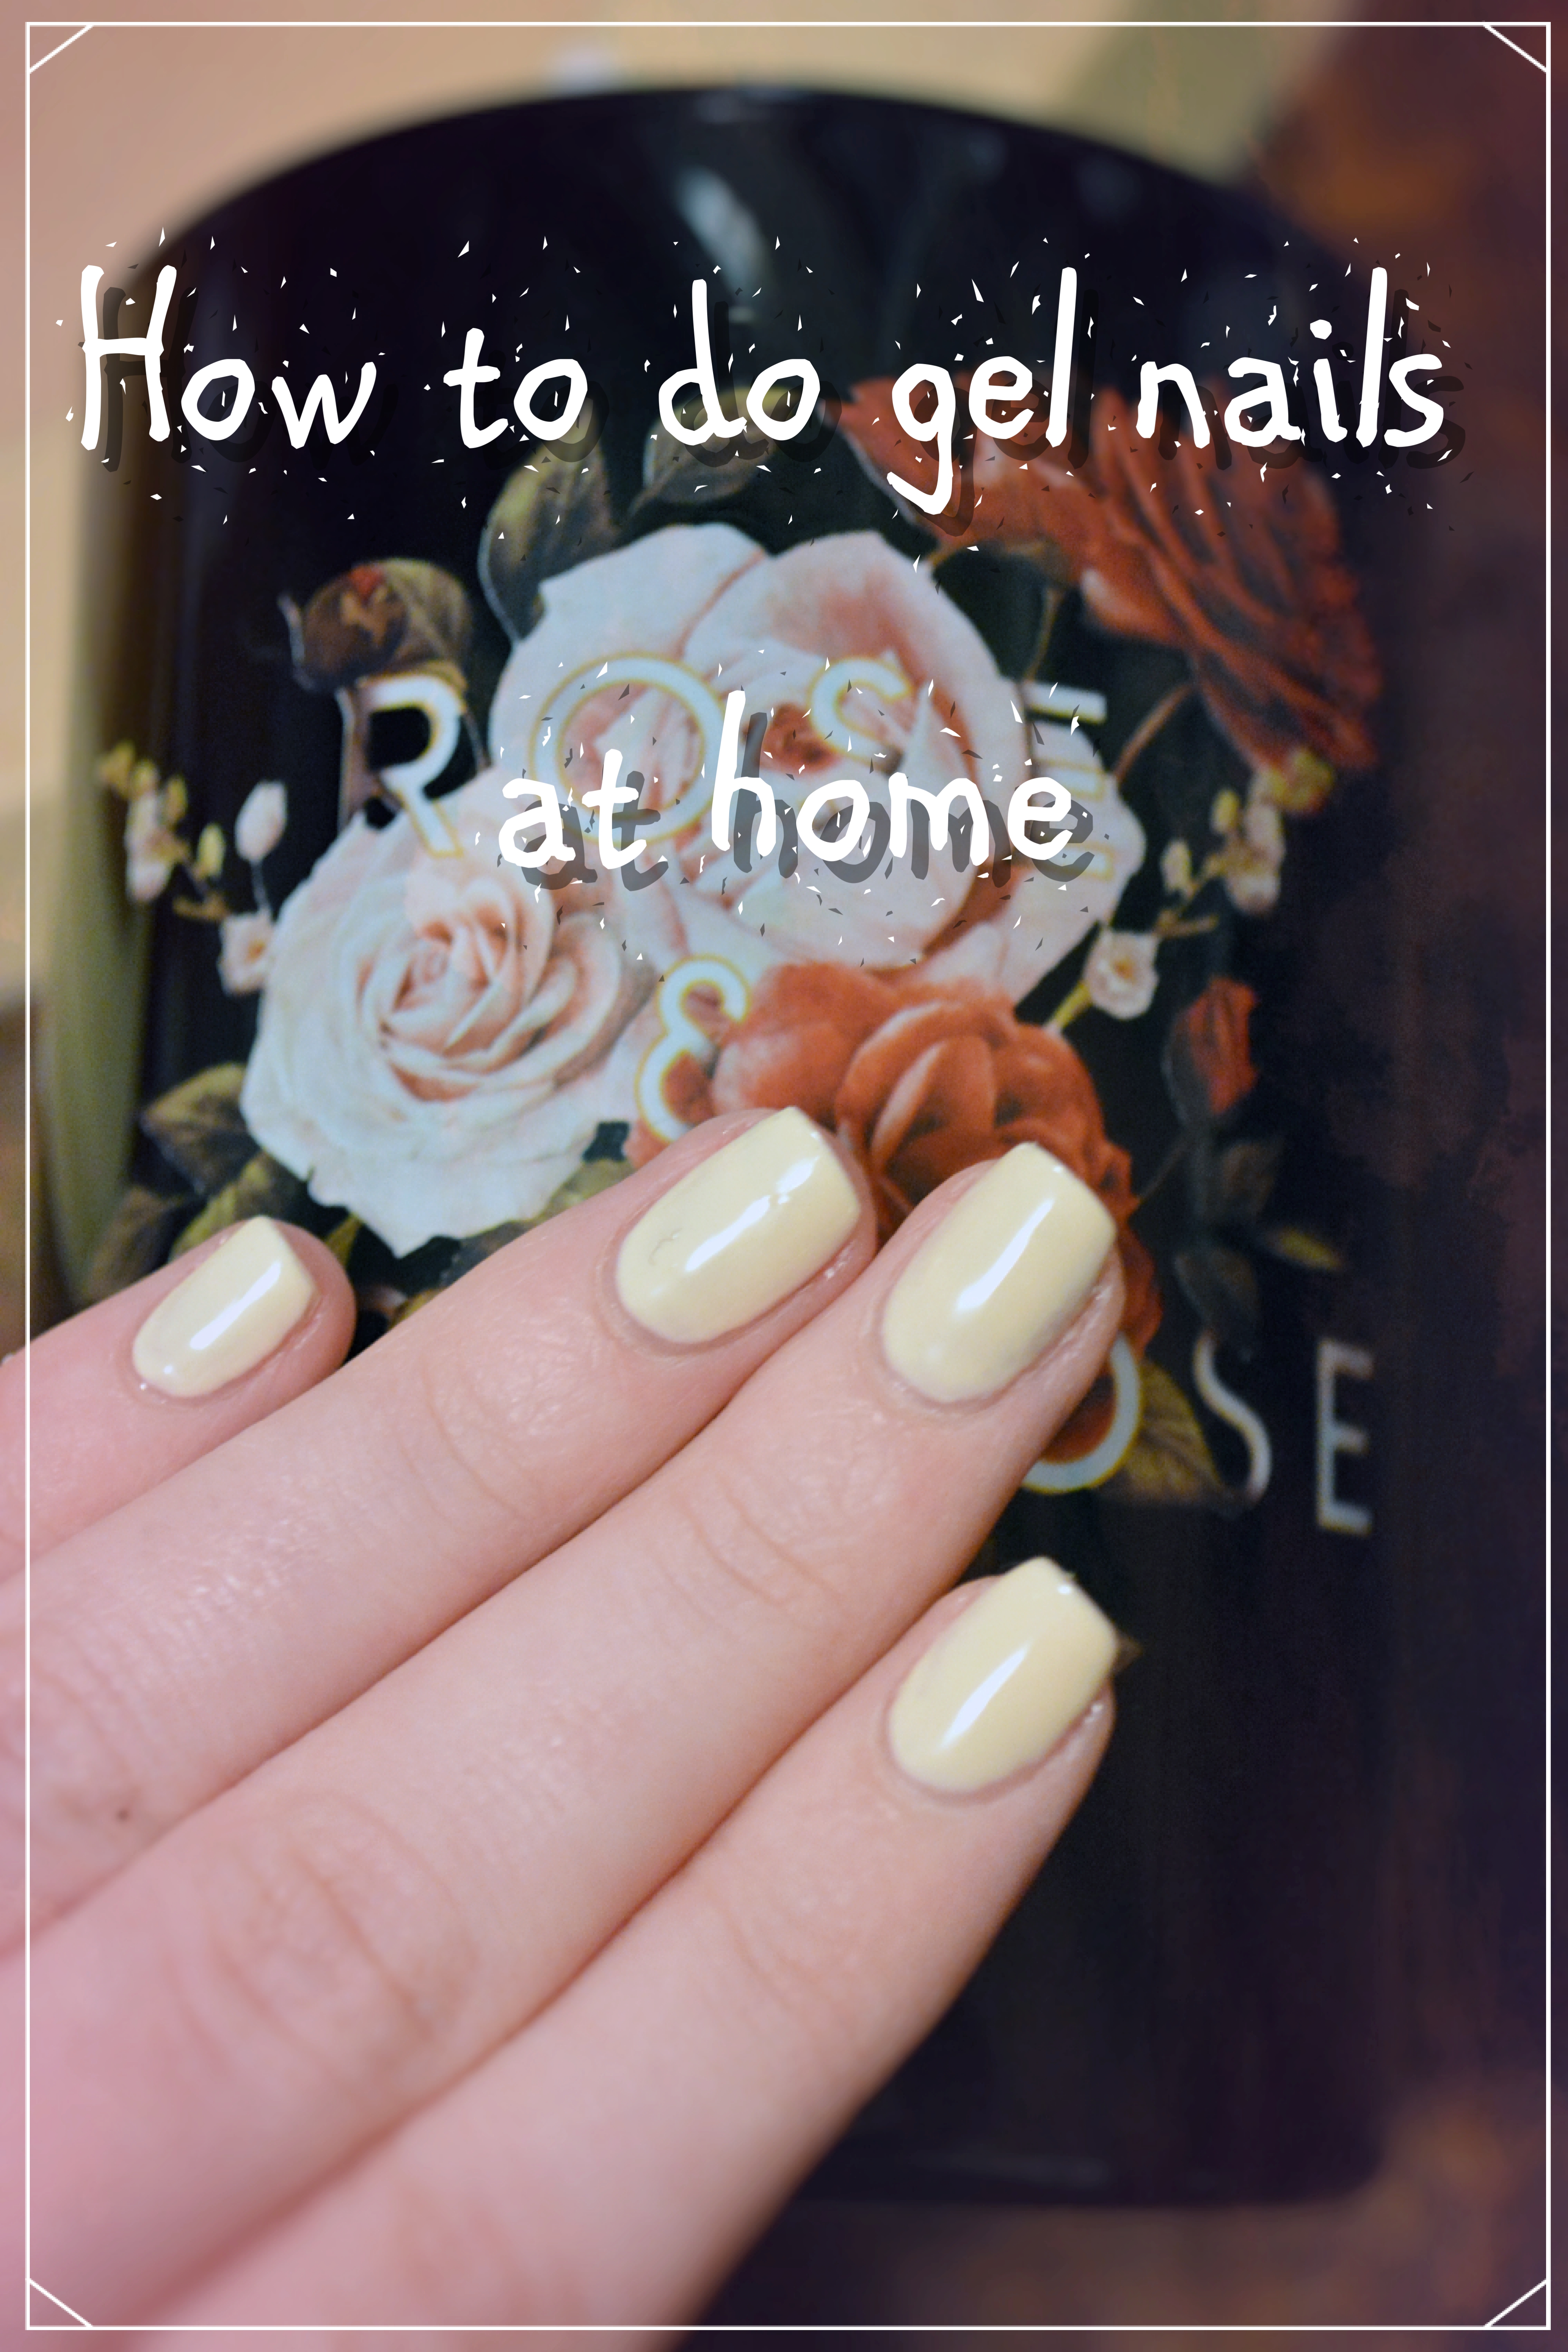 How to do easy gel nails at home!